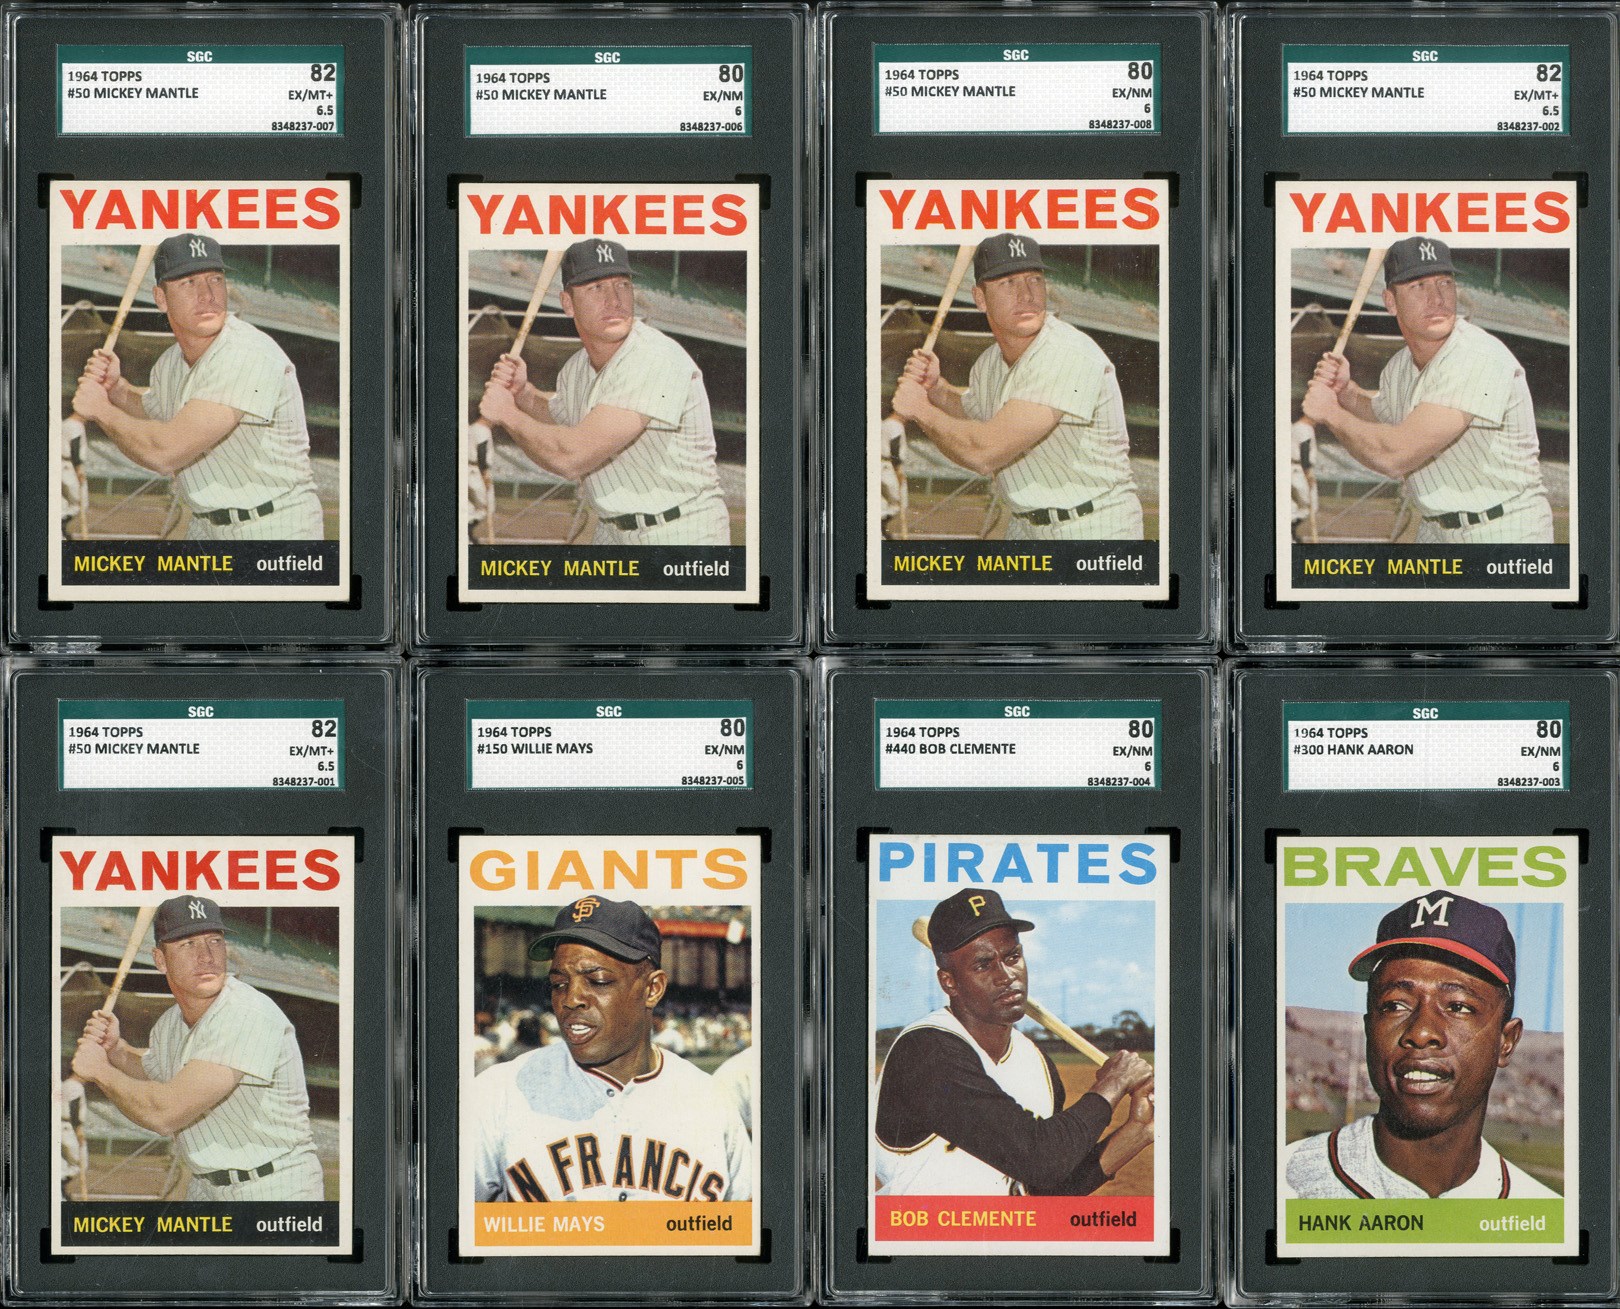 1964 Topps High Grade Lot of 500+ cards Loaded with Stars (8 SGC Graded)